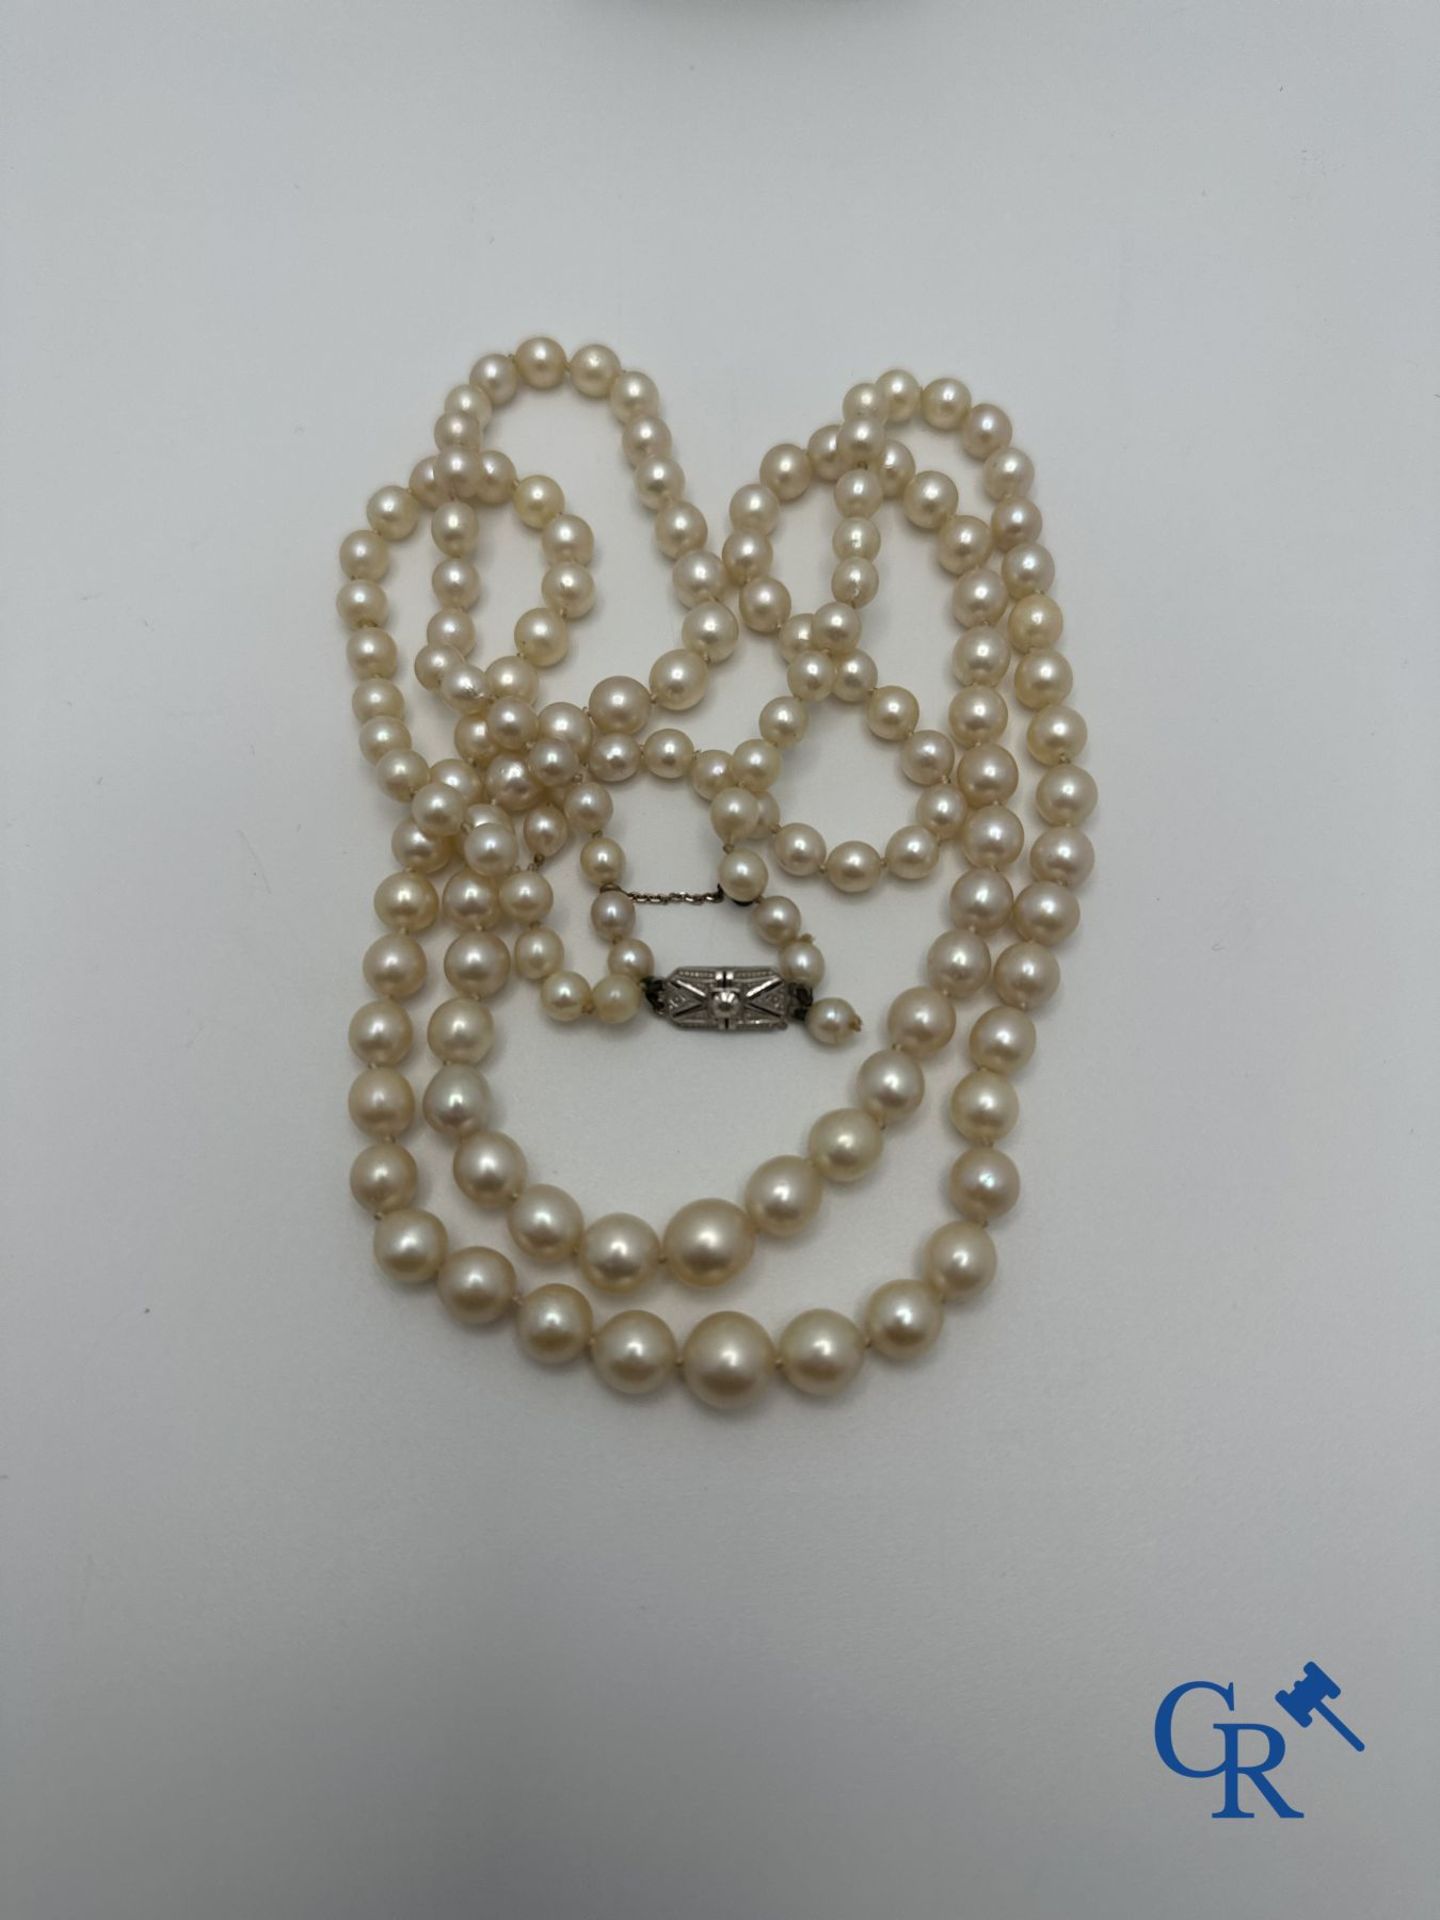 Jewellery: Lot consisting of a pearl necklace with gold clasp 18K and a pair of earrings in white go - Bild 3 aus 5